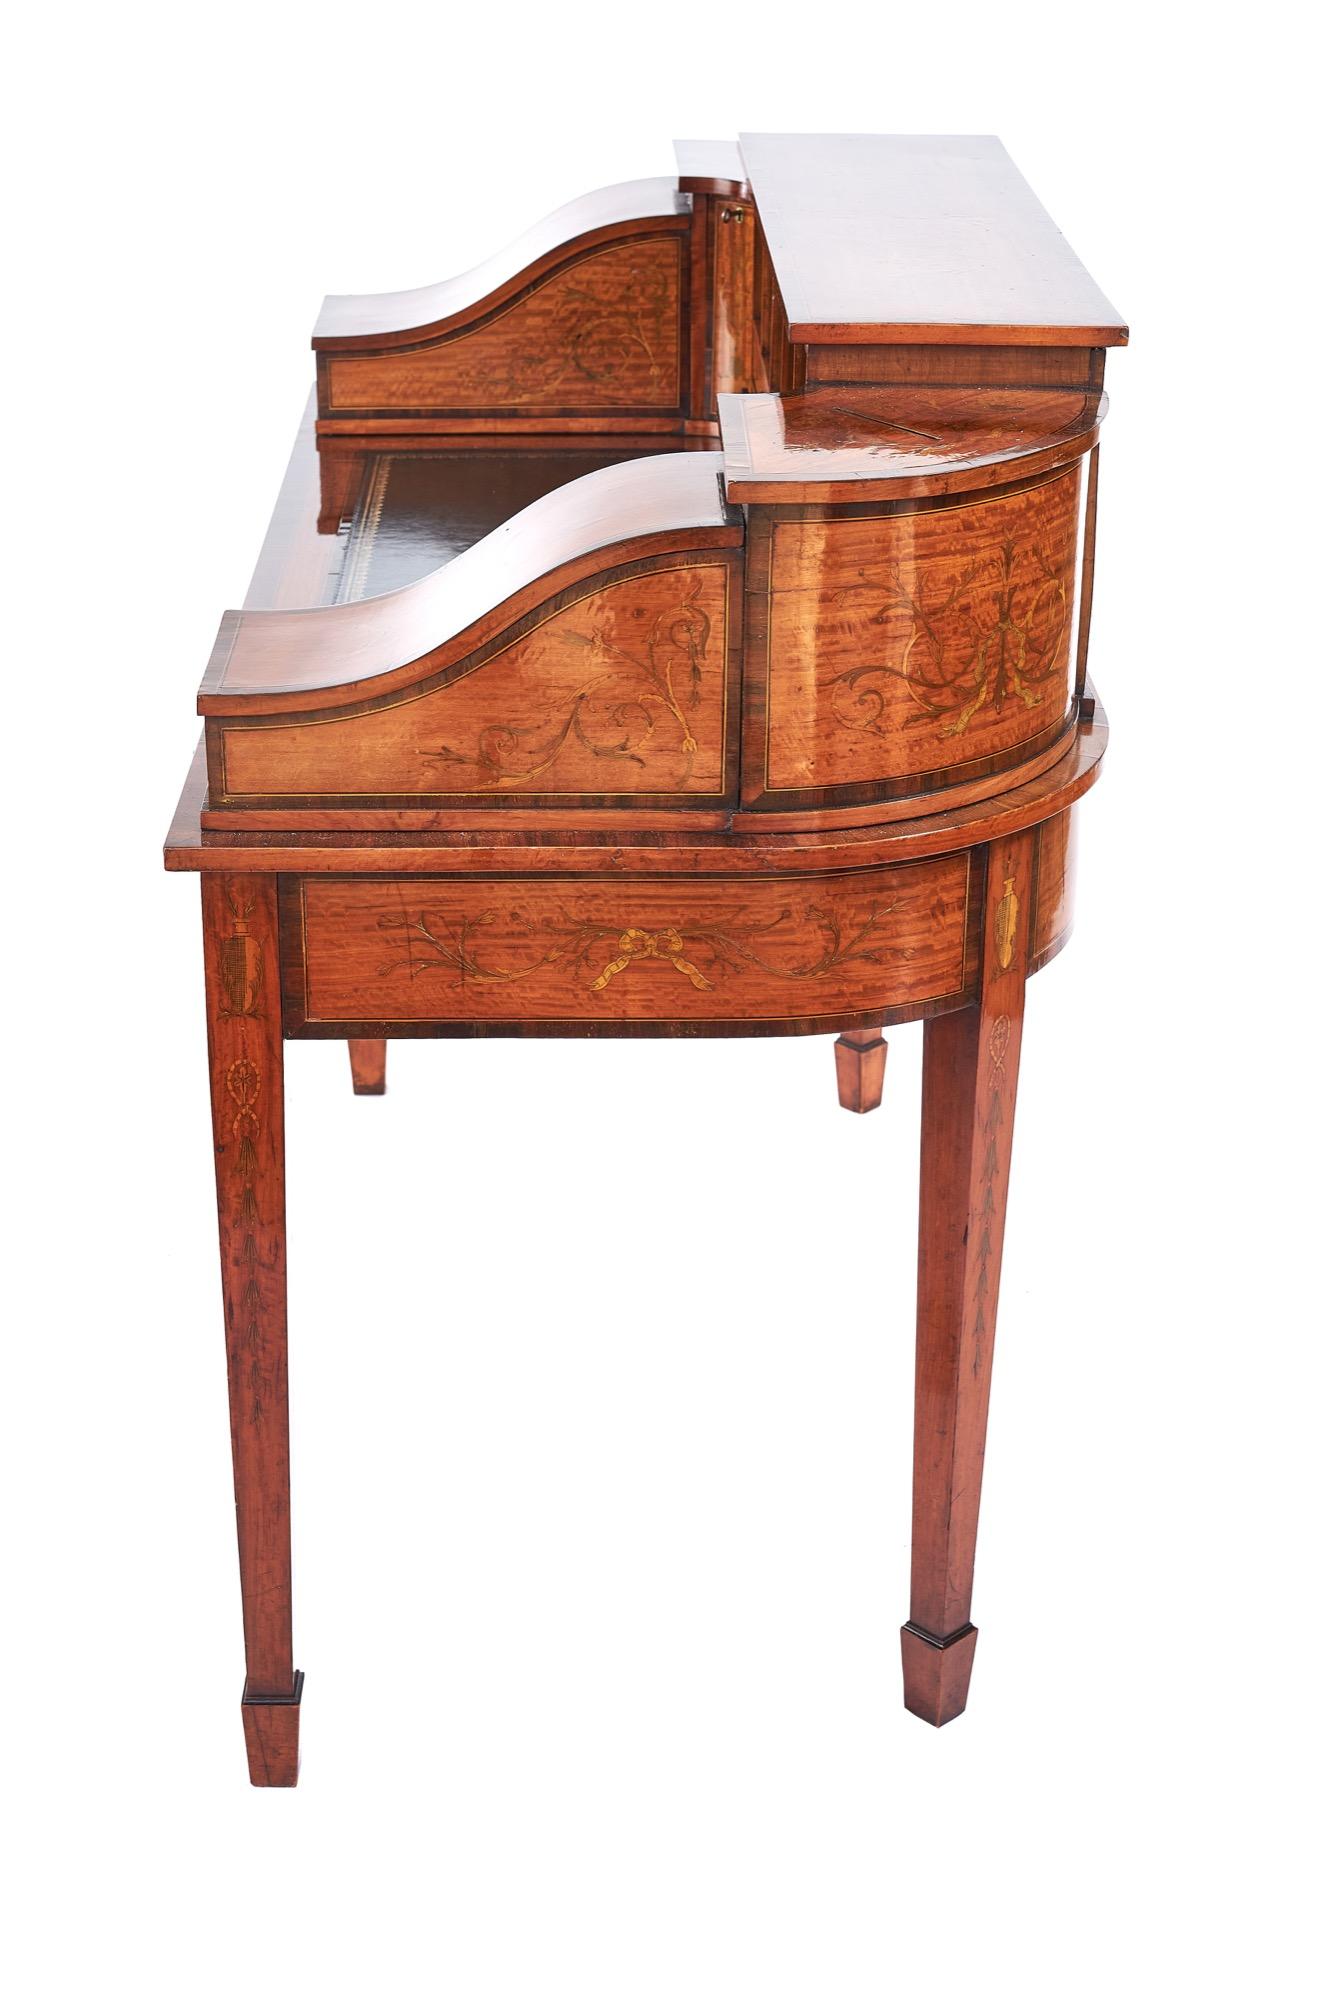 Inlay Fine Sheraton Revival Satinwood Inlaid Carlton House Desk. with Letter Boxes, Ci For Sale